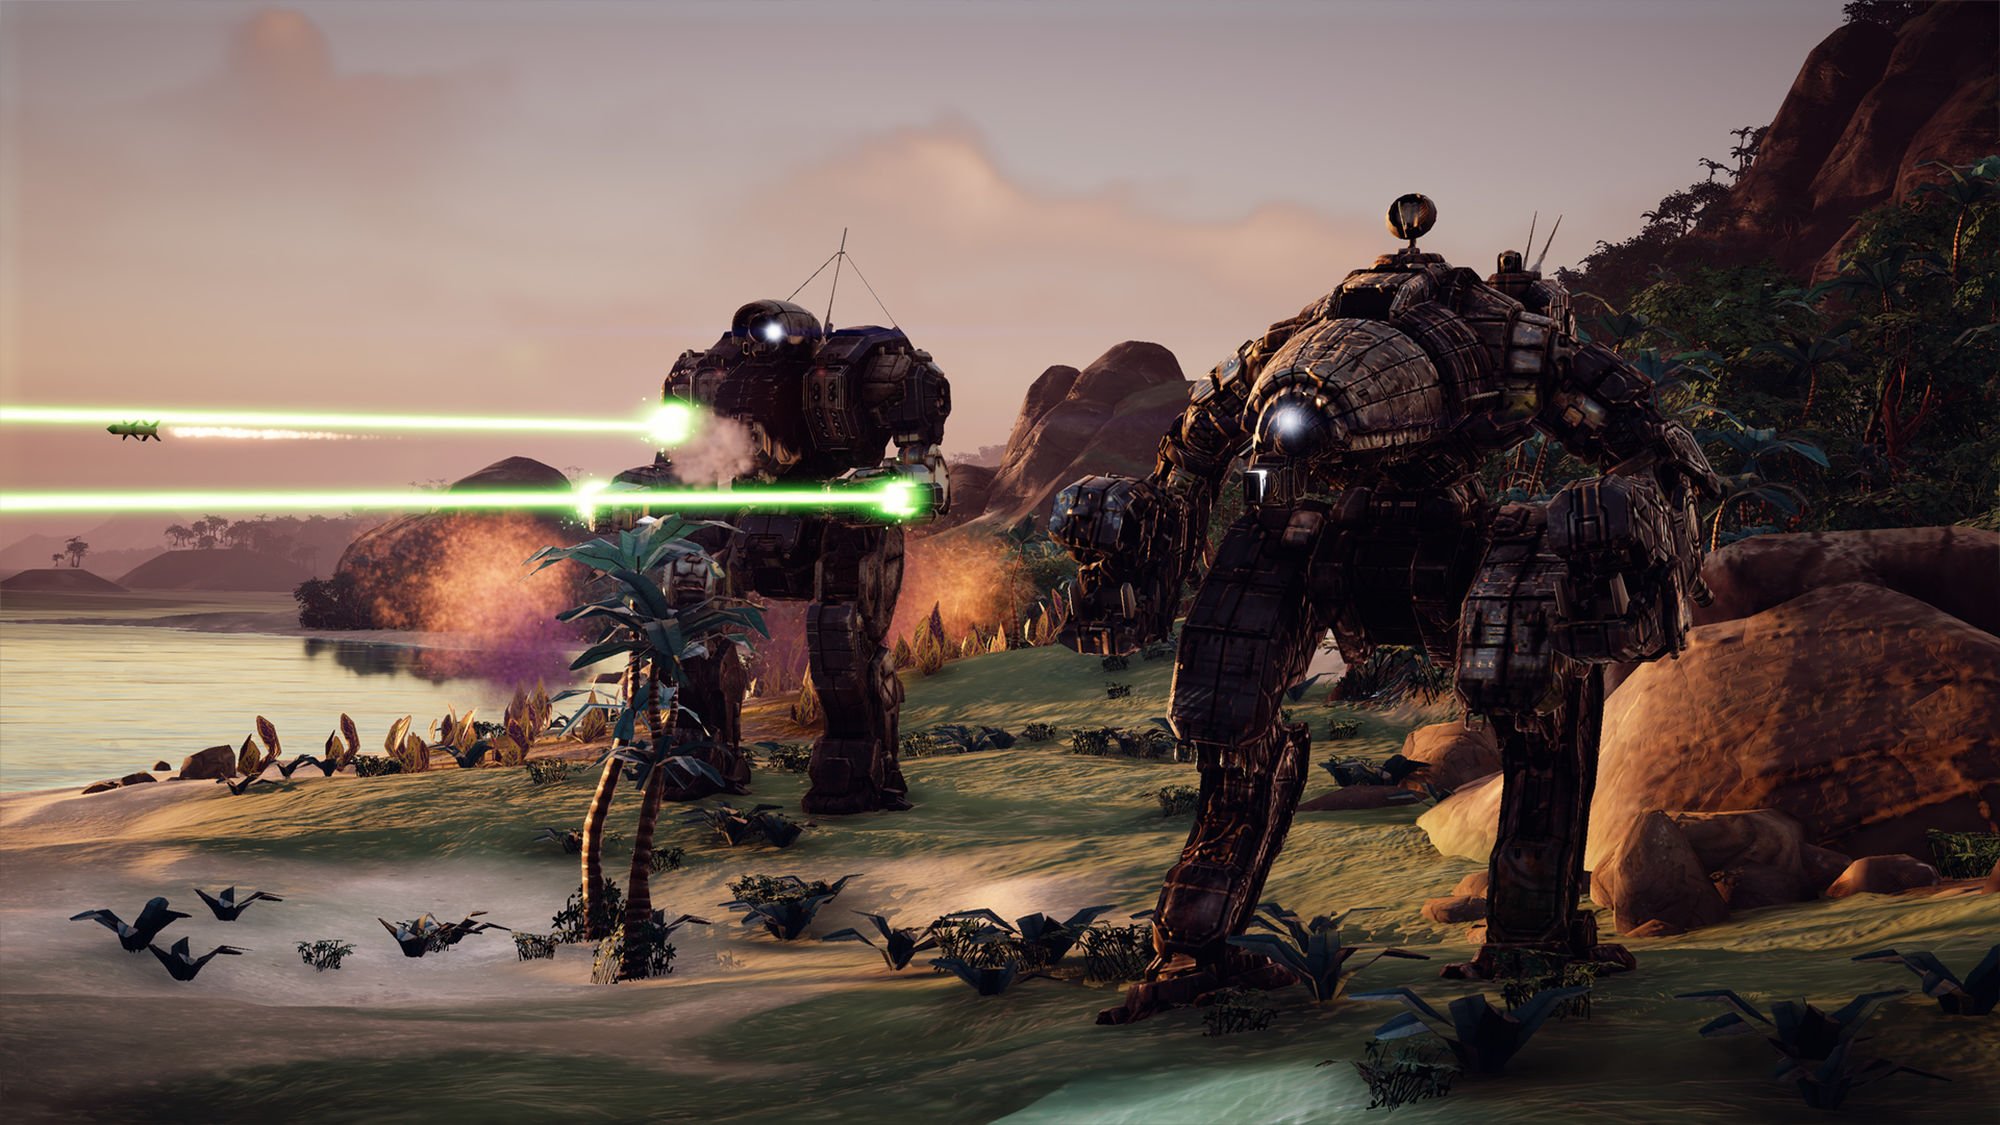 Battletech gets first expansion in November with 'Flashpoint'